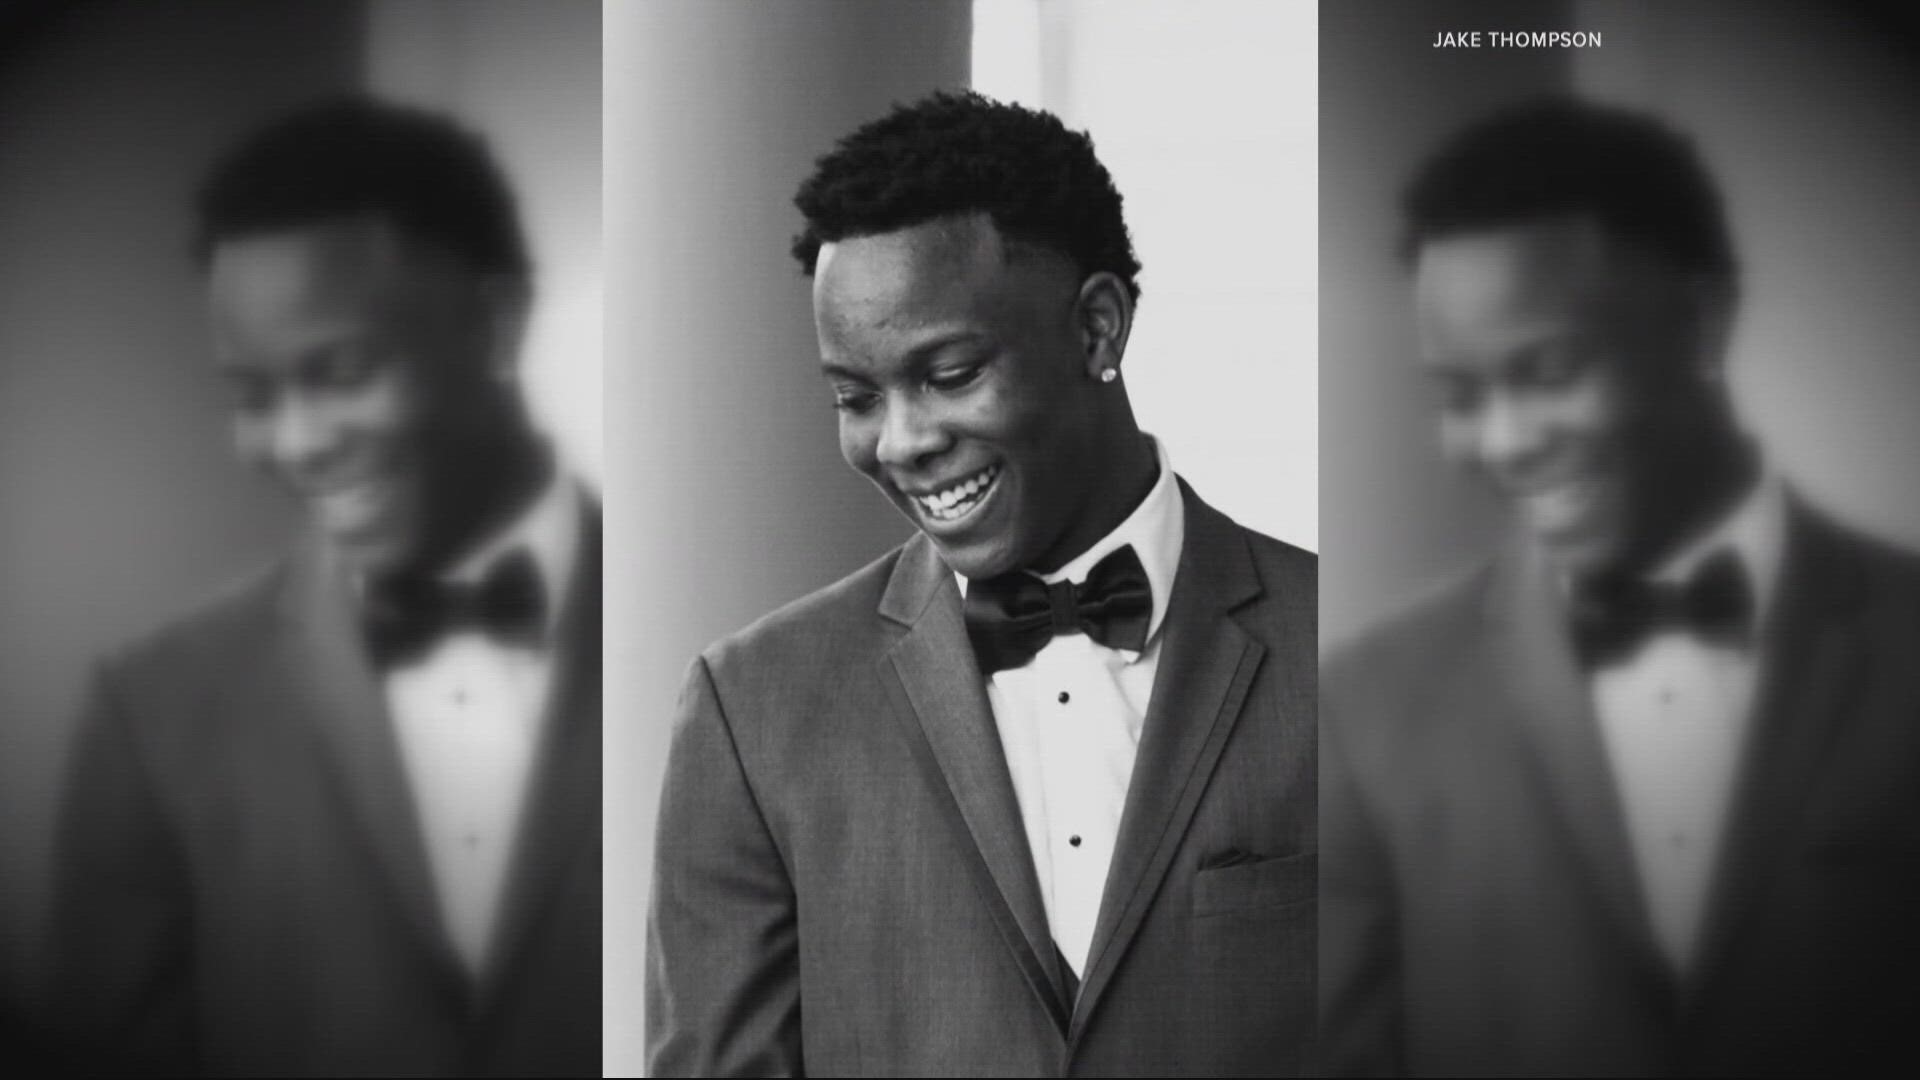 The family of Kevin Peterson Jr. has filed a lawsuit against the sheriff's office over his shooting death in October 2020. KGW's Bryant Clerkley has the details.